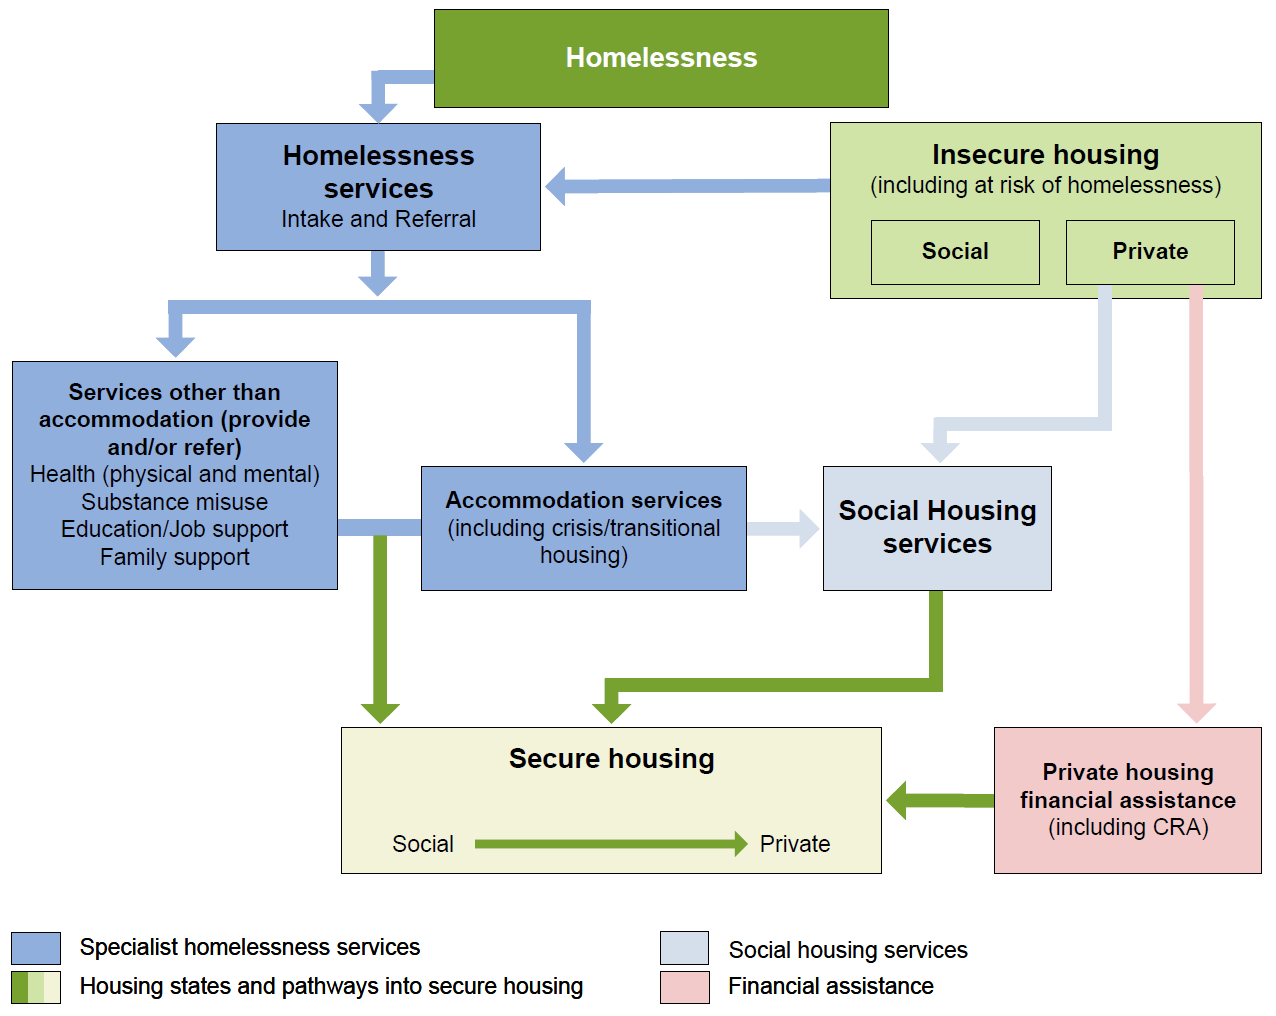 Pathways from homelessness via homelessness services intake and referral, through accommodation services (including crisis/transitional housing) or other services such as health, substance abuse, education/job support or family support to secure housing, moving from social to private. Another pathway shows moving from insecure housing (including at risk of homelessness) via homelessness services, social housing services or private housing financial assistance to secure housing.